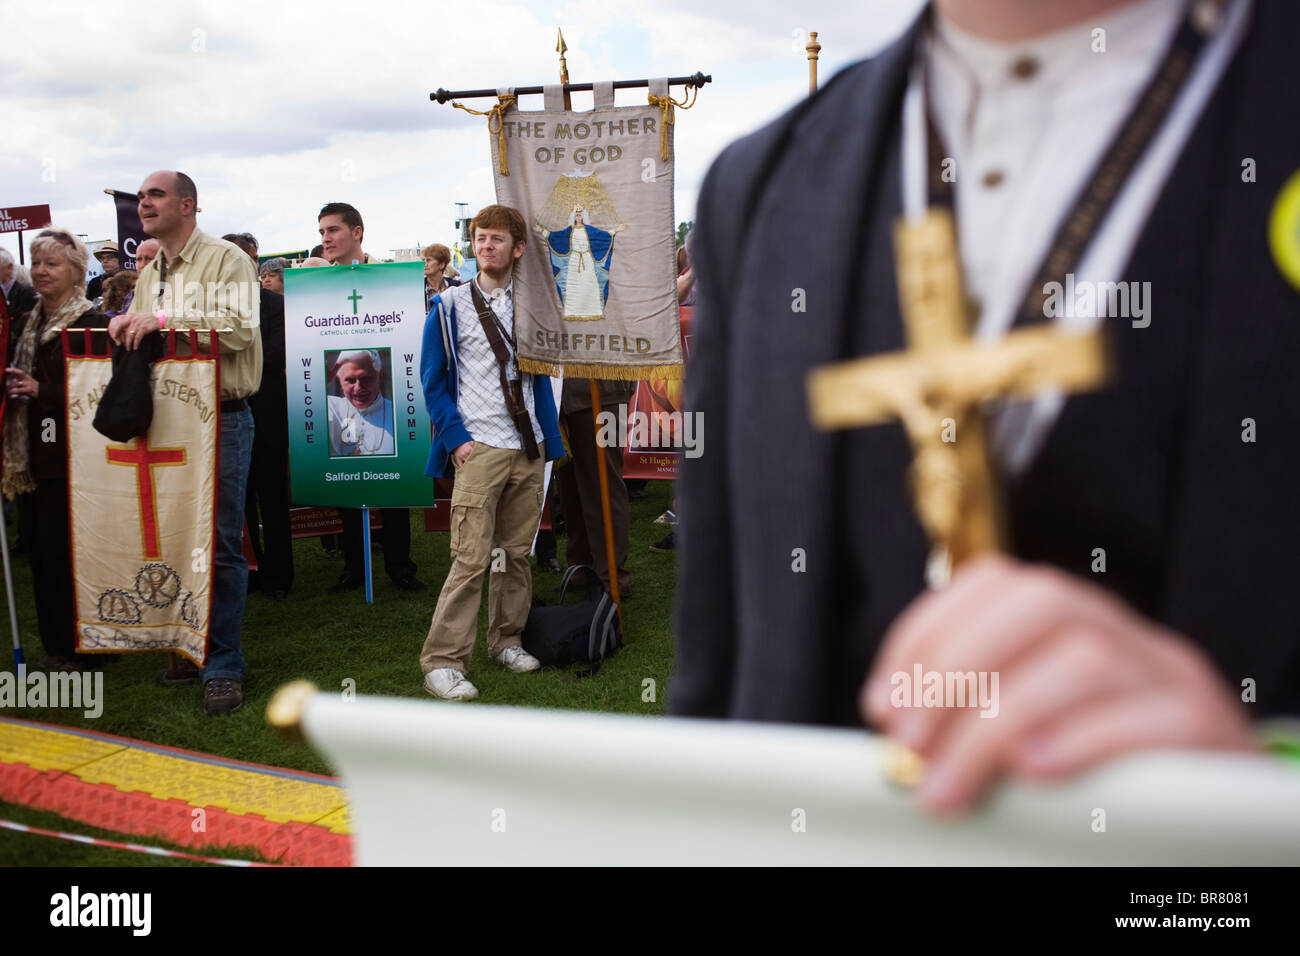 Local Catholic church groups with banners await the start of the Hyde Park rally during Pope Benedict XVI's papal tour of UK Stock Photo